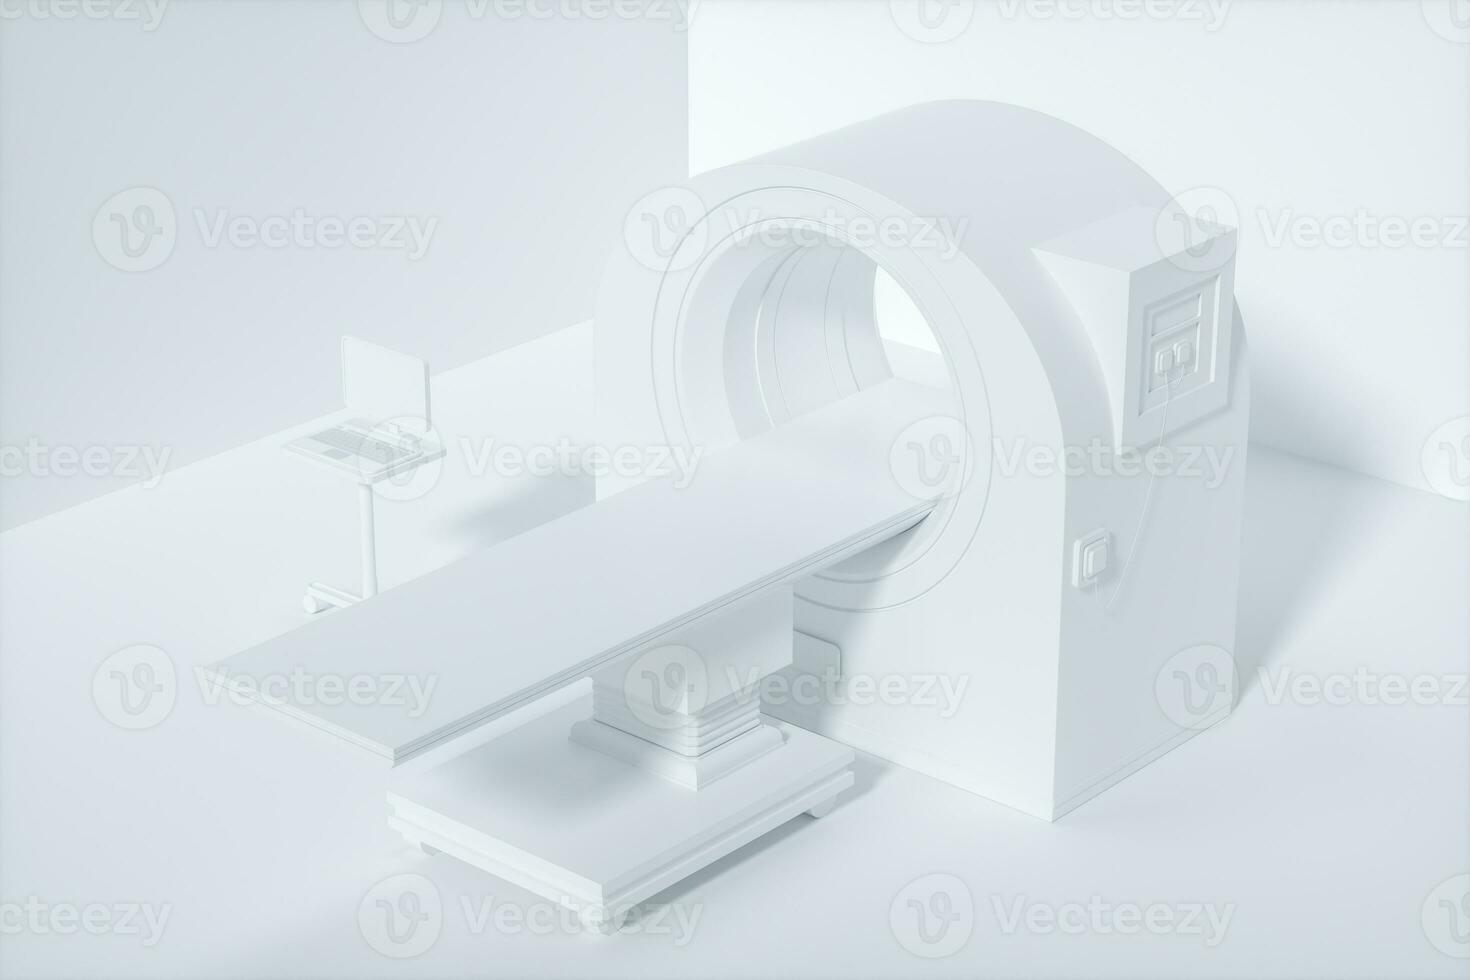 The medical equipment CT machine in the white empty room, 3d rendering. photo